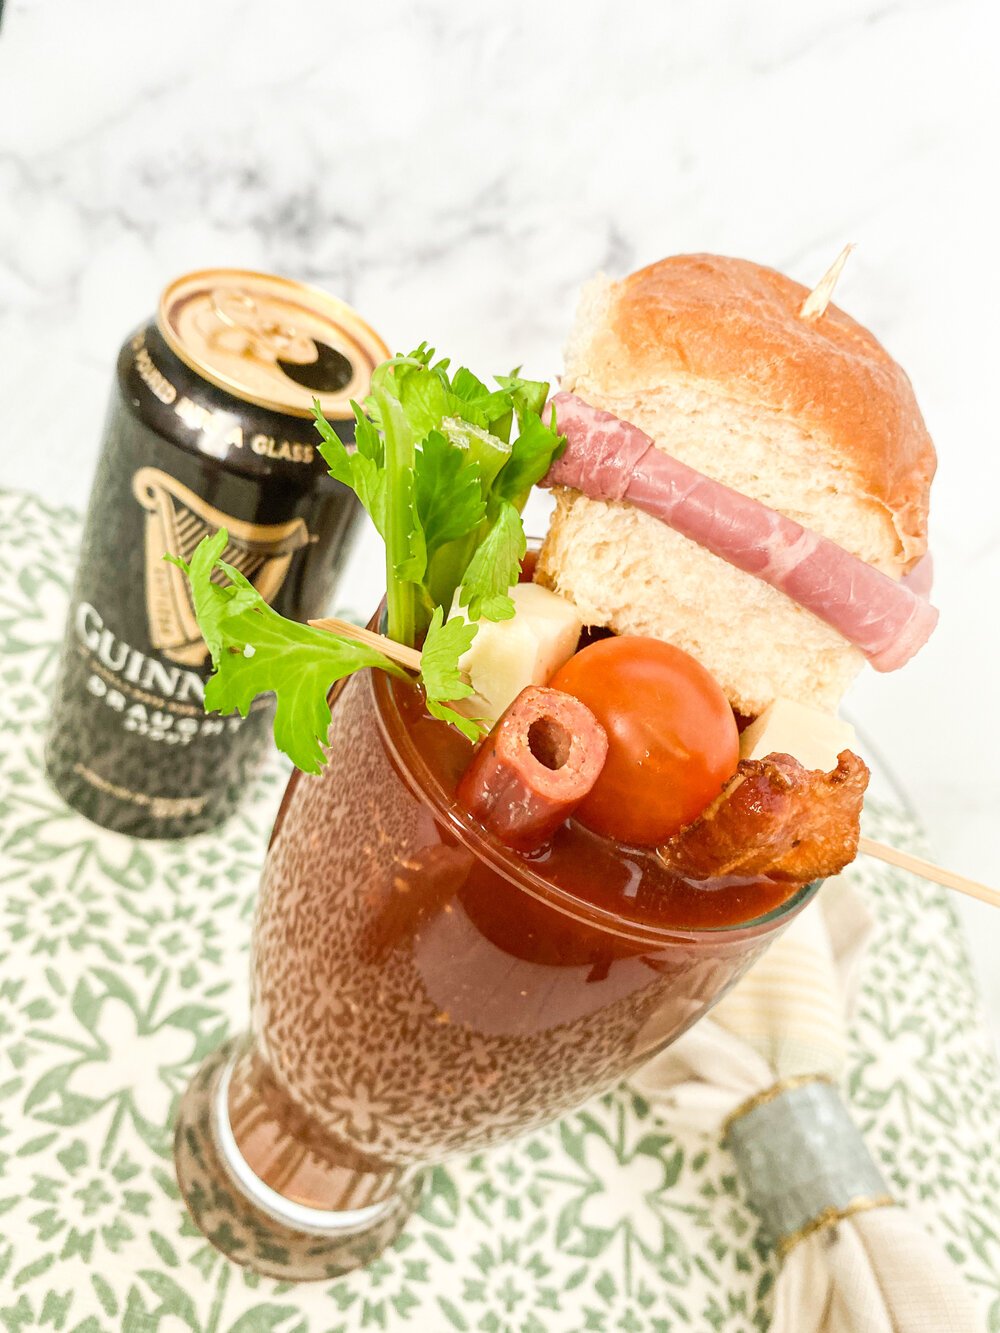 guiness+bloody+mary+recipe+bloody+mary+obsessed+recipes.jpeg